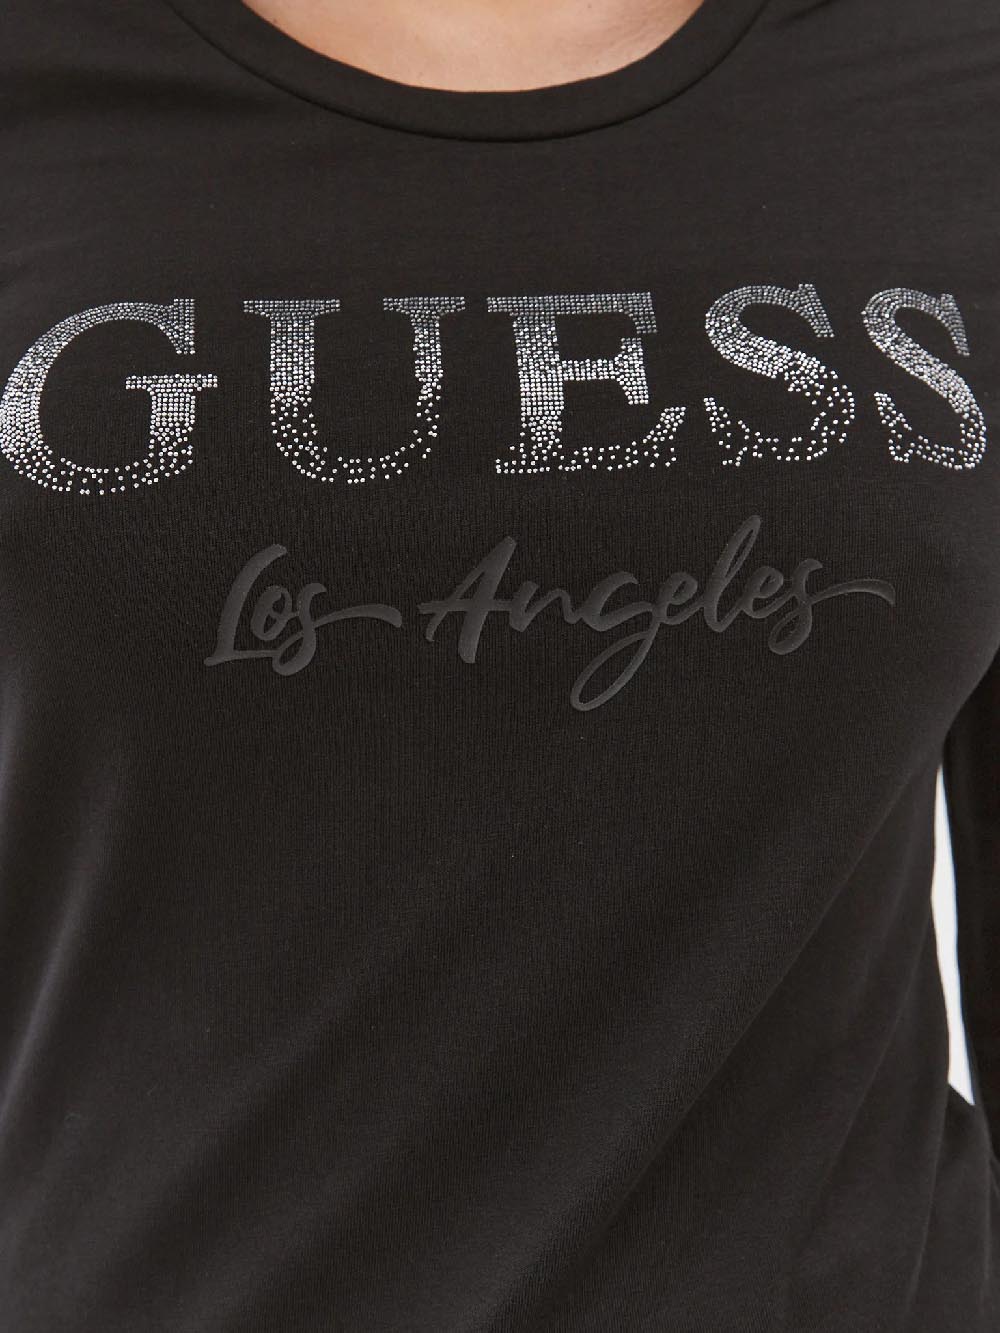 Guess T-shirt Donna Nero